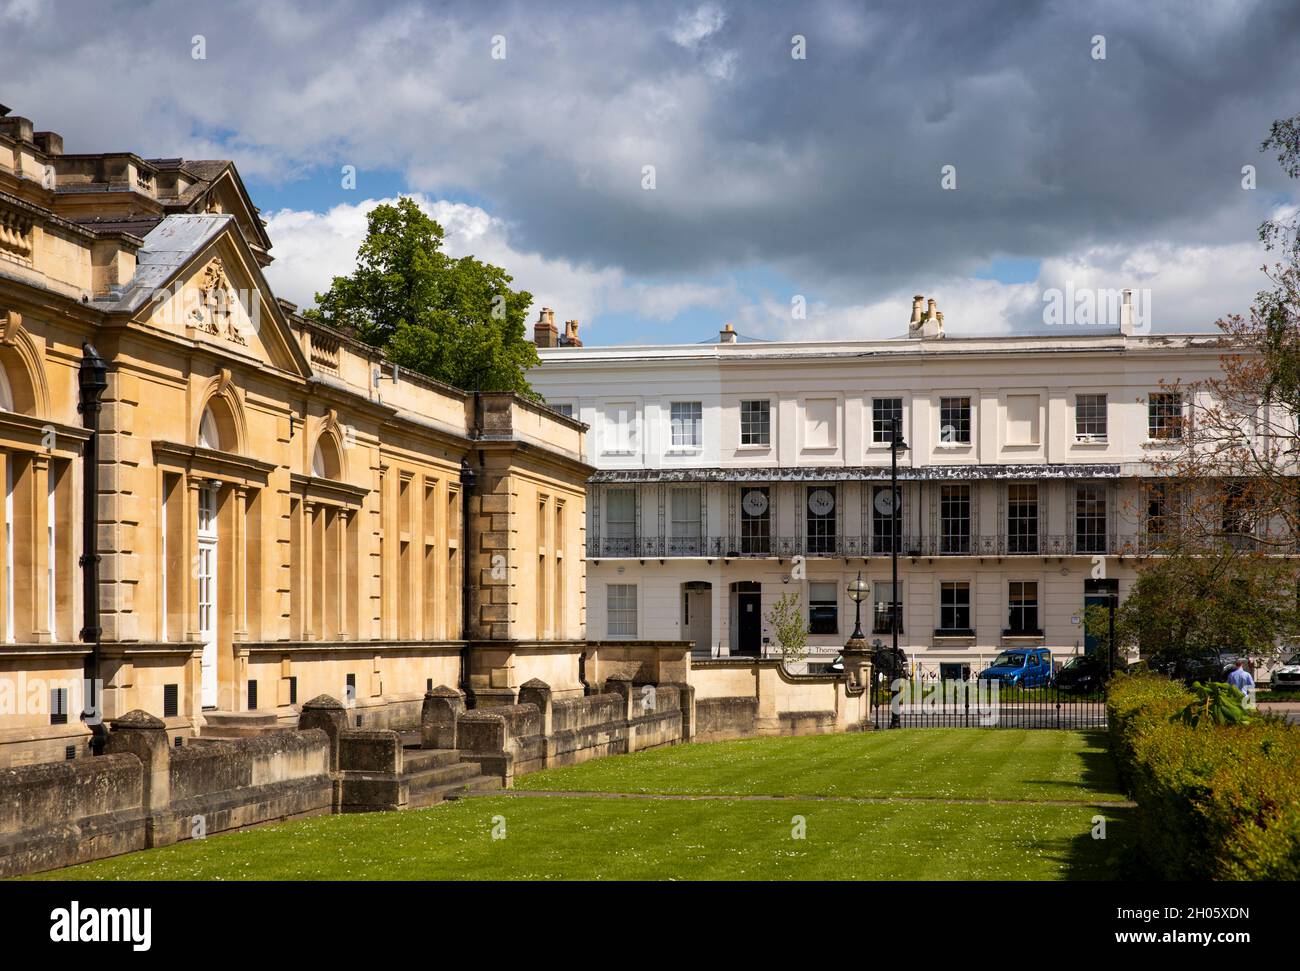 UK, Gloucestershire, Cheltenham, Montpelier, Town Hall and Imperial Square houses Stock Photo